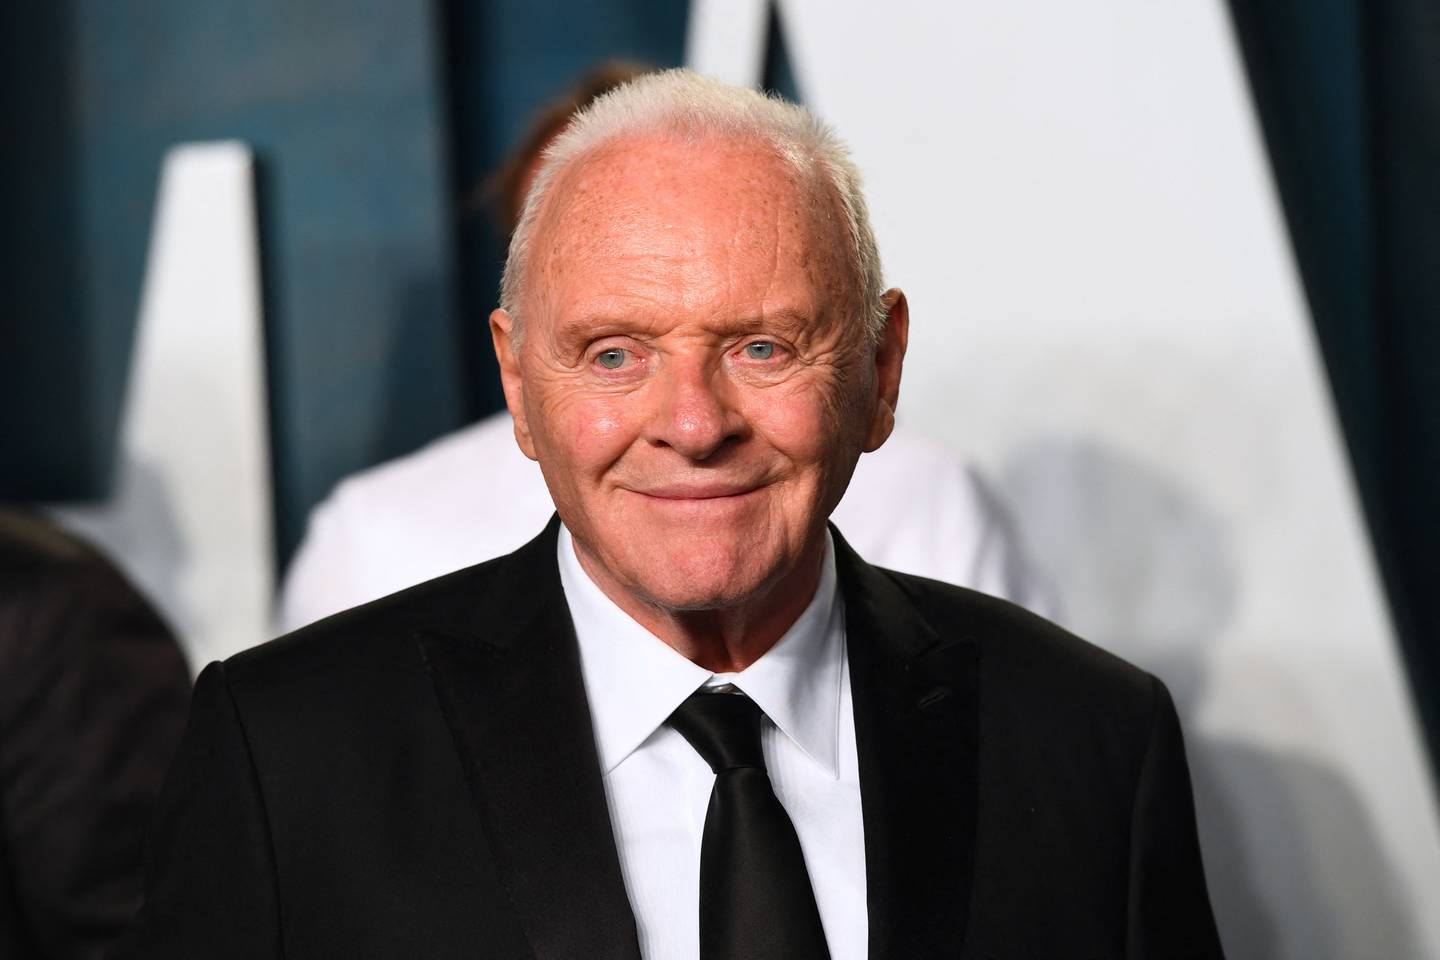 In 2021, Anthony Hopkins became the oldest person to win the Best Actor Oscar. AFP